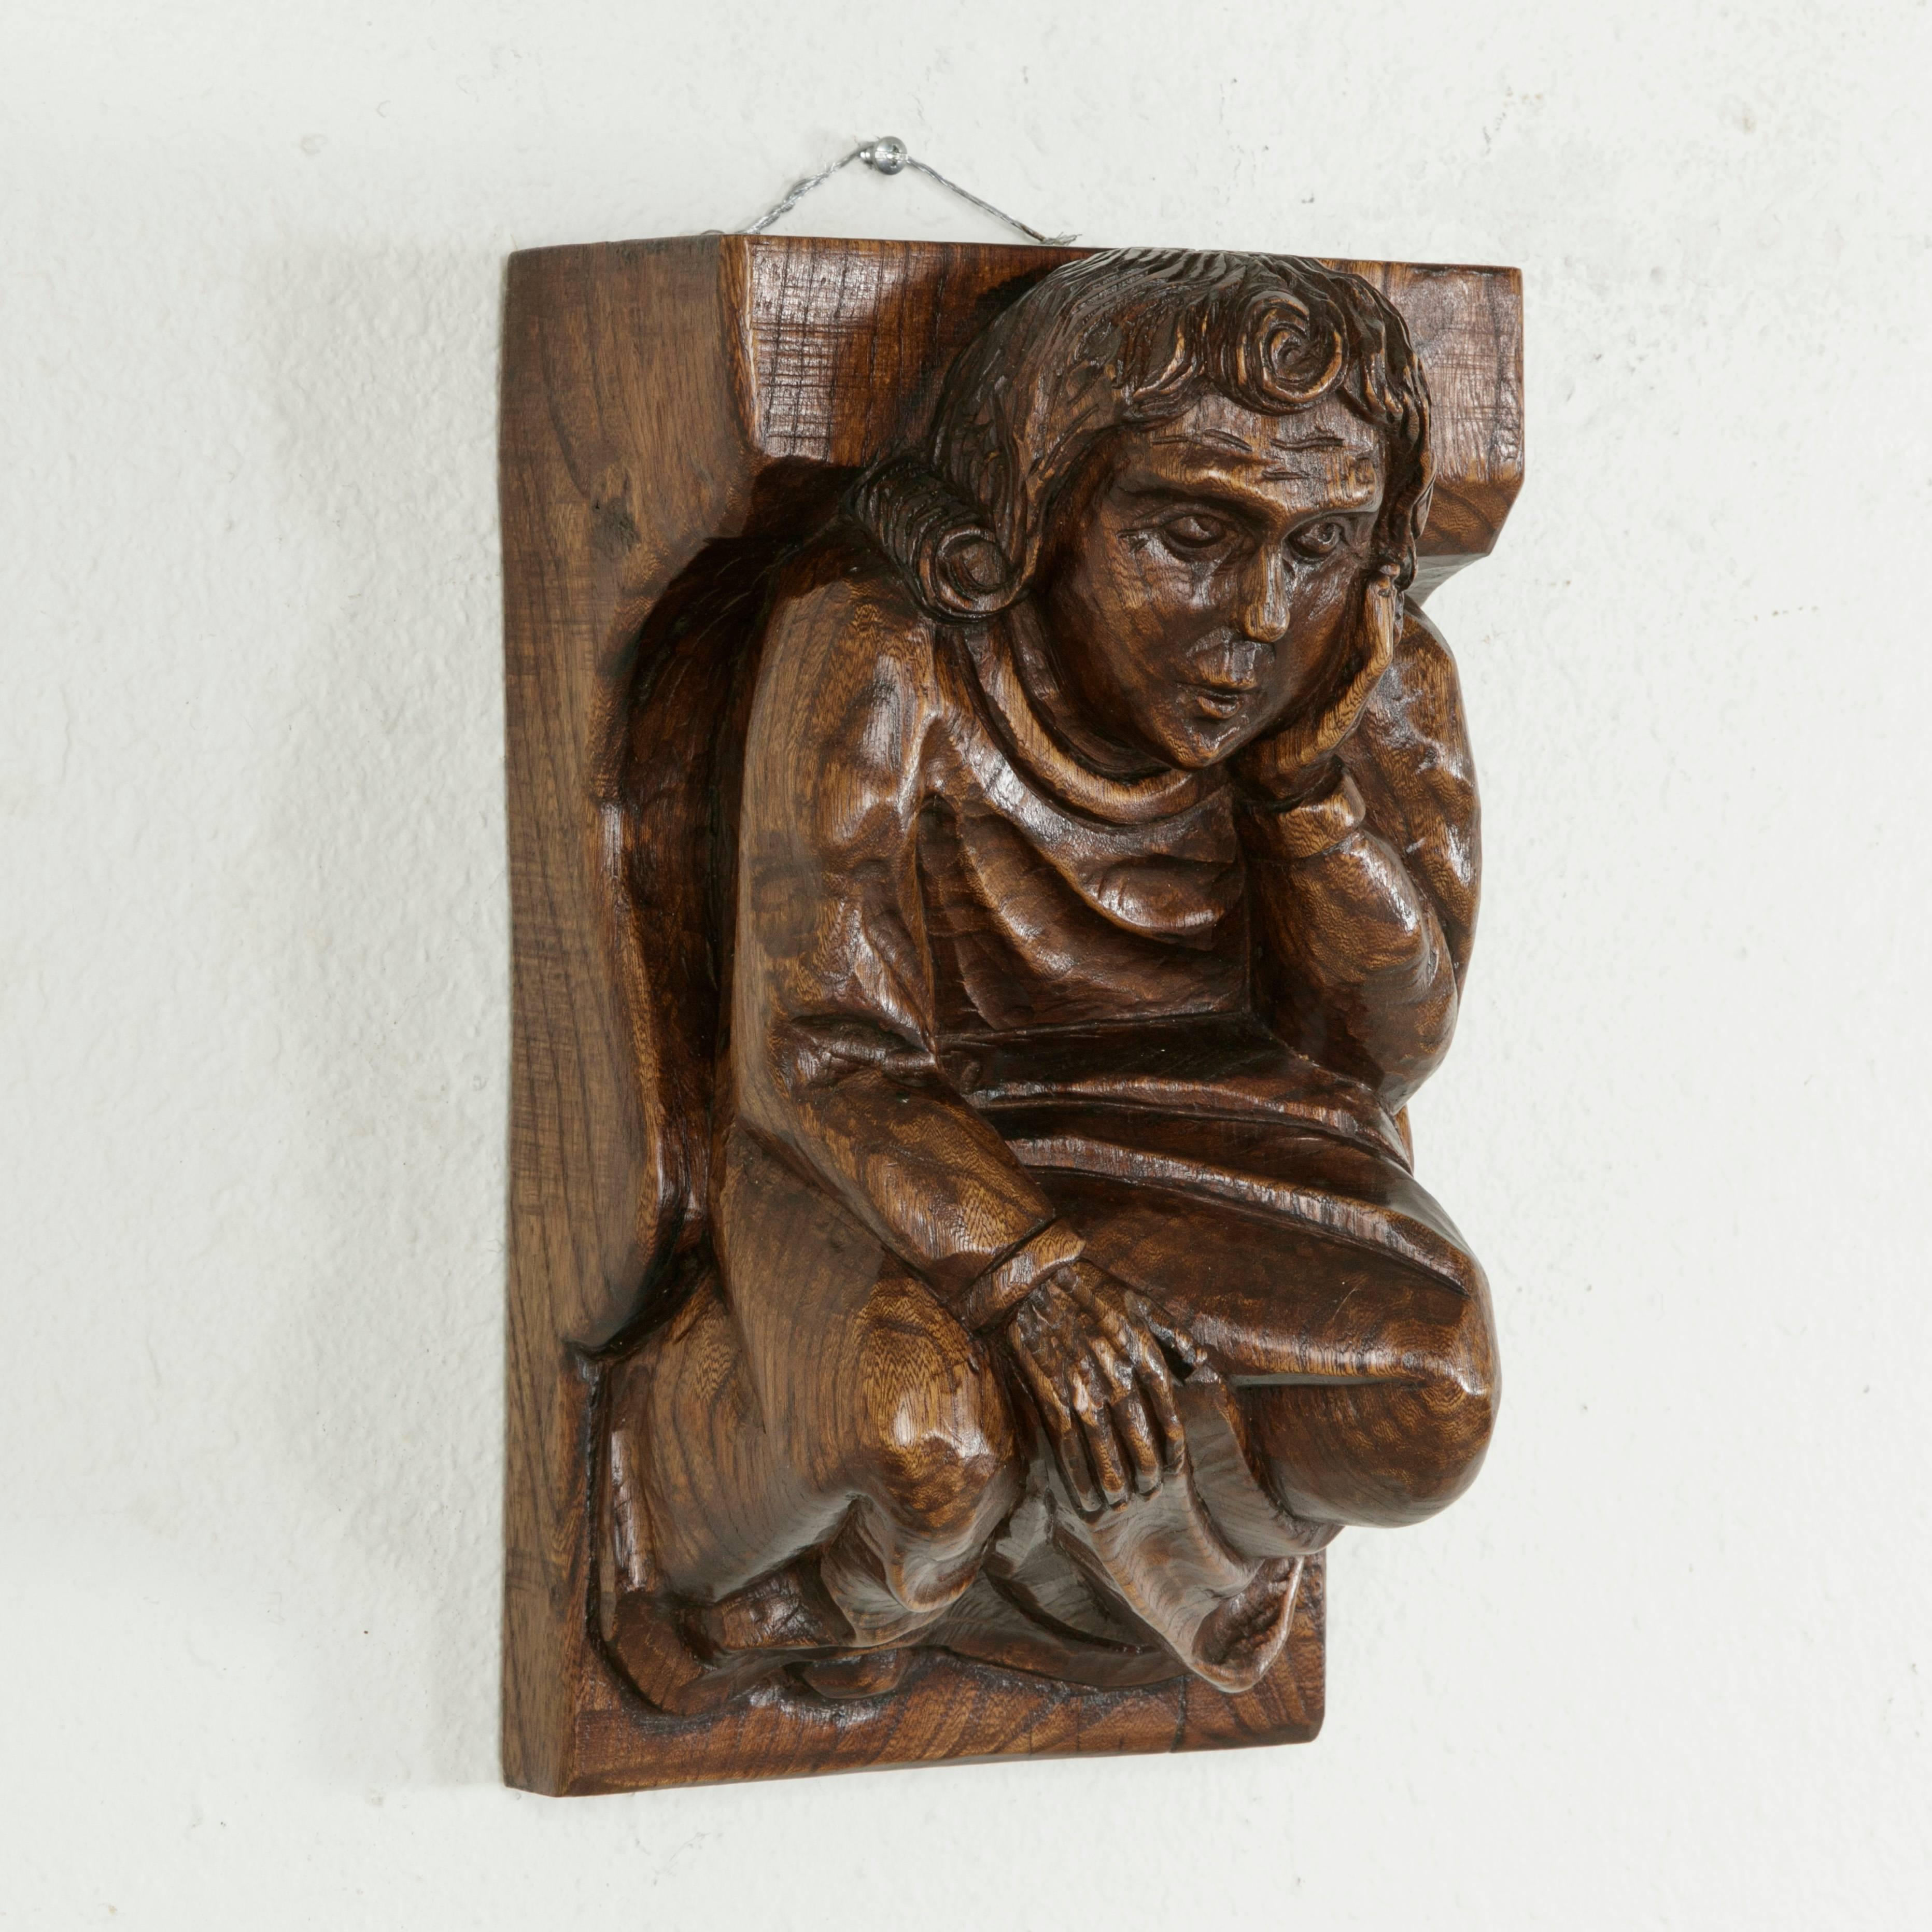 This midcentury French solid elm wall sconce was originally placed under a ceiling beam for support and features a hand carved medieval figure. Dressed in a simple robe, the medieval man rests his head on his left hand in a pensive pose while his